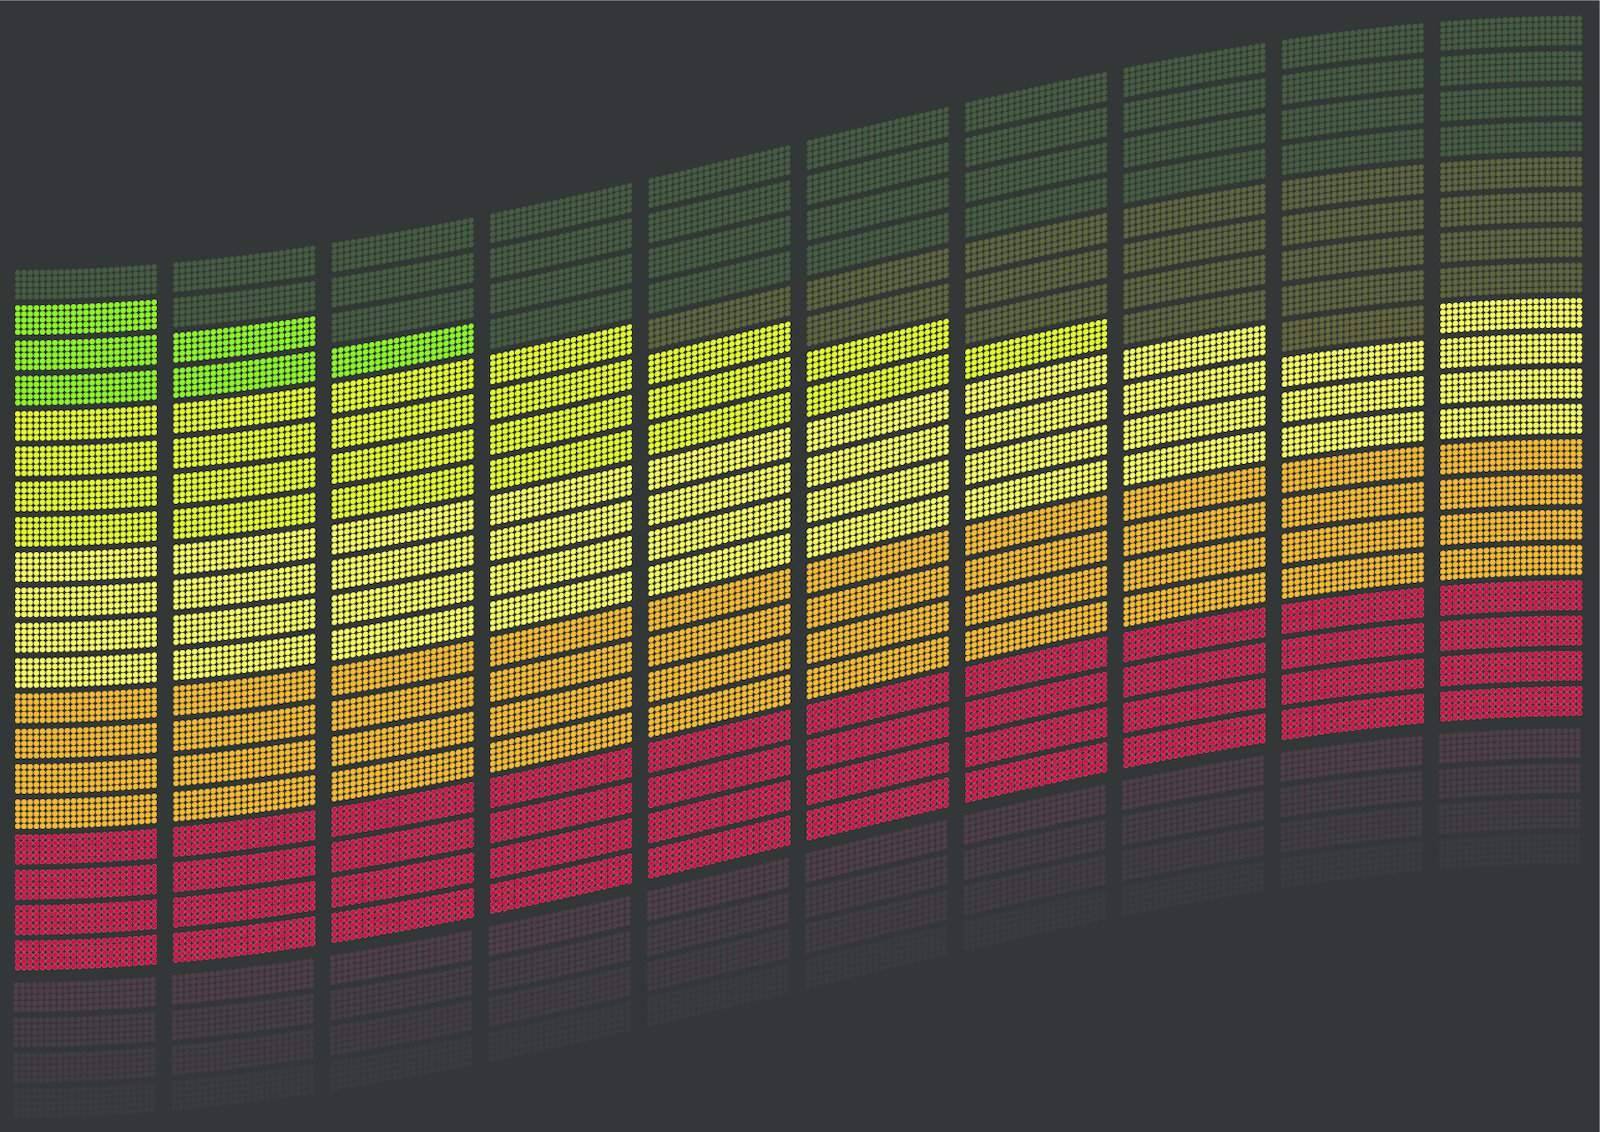 Graphic Equalizer - Multicolored Blocks on Black Background